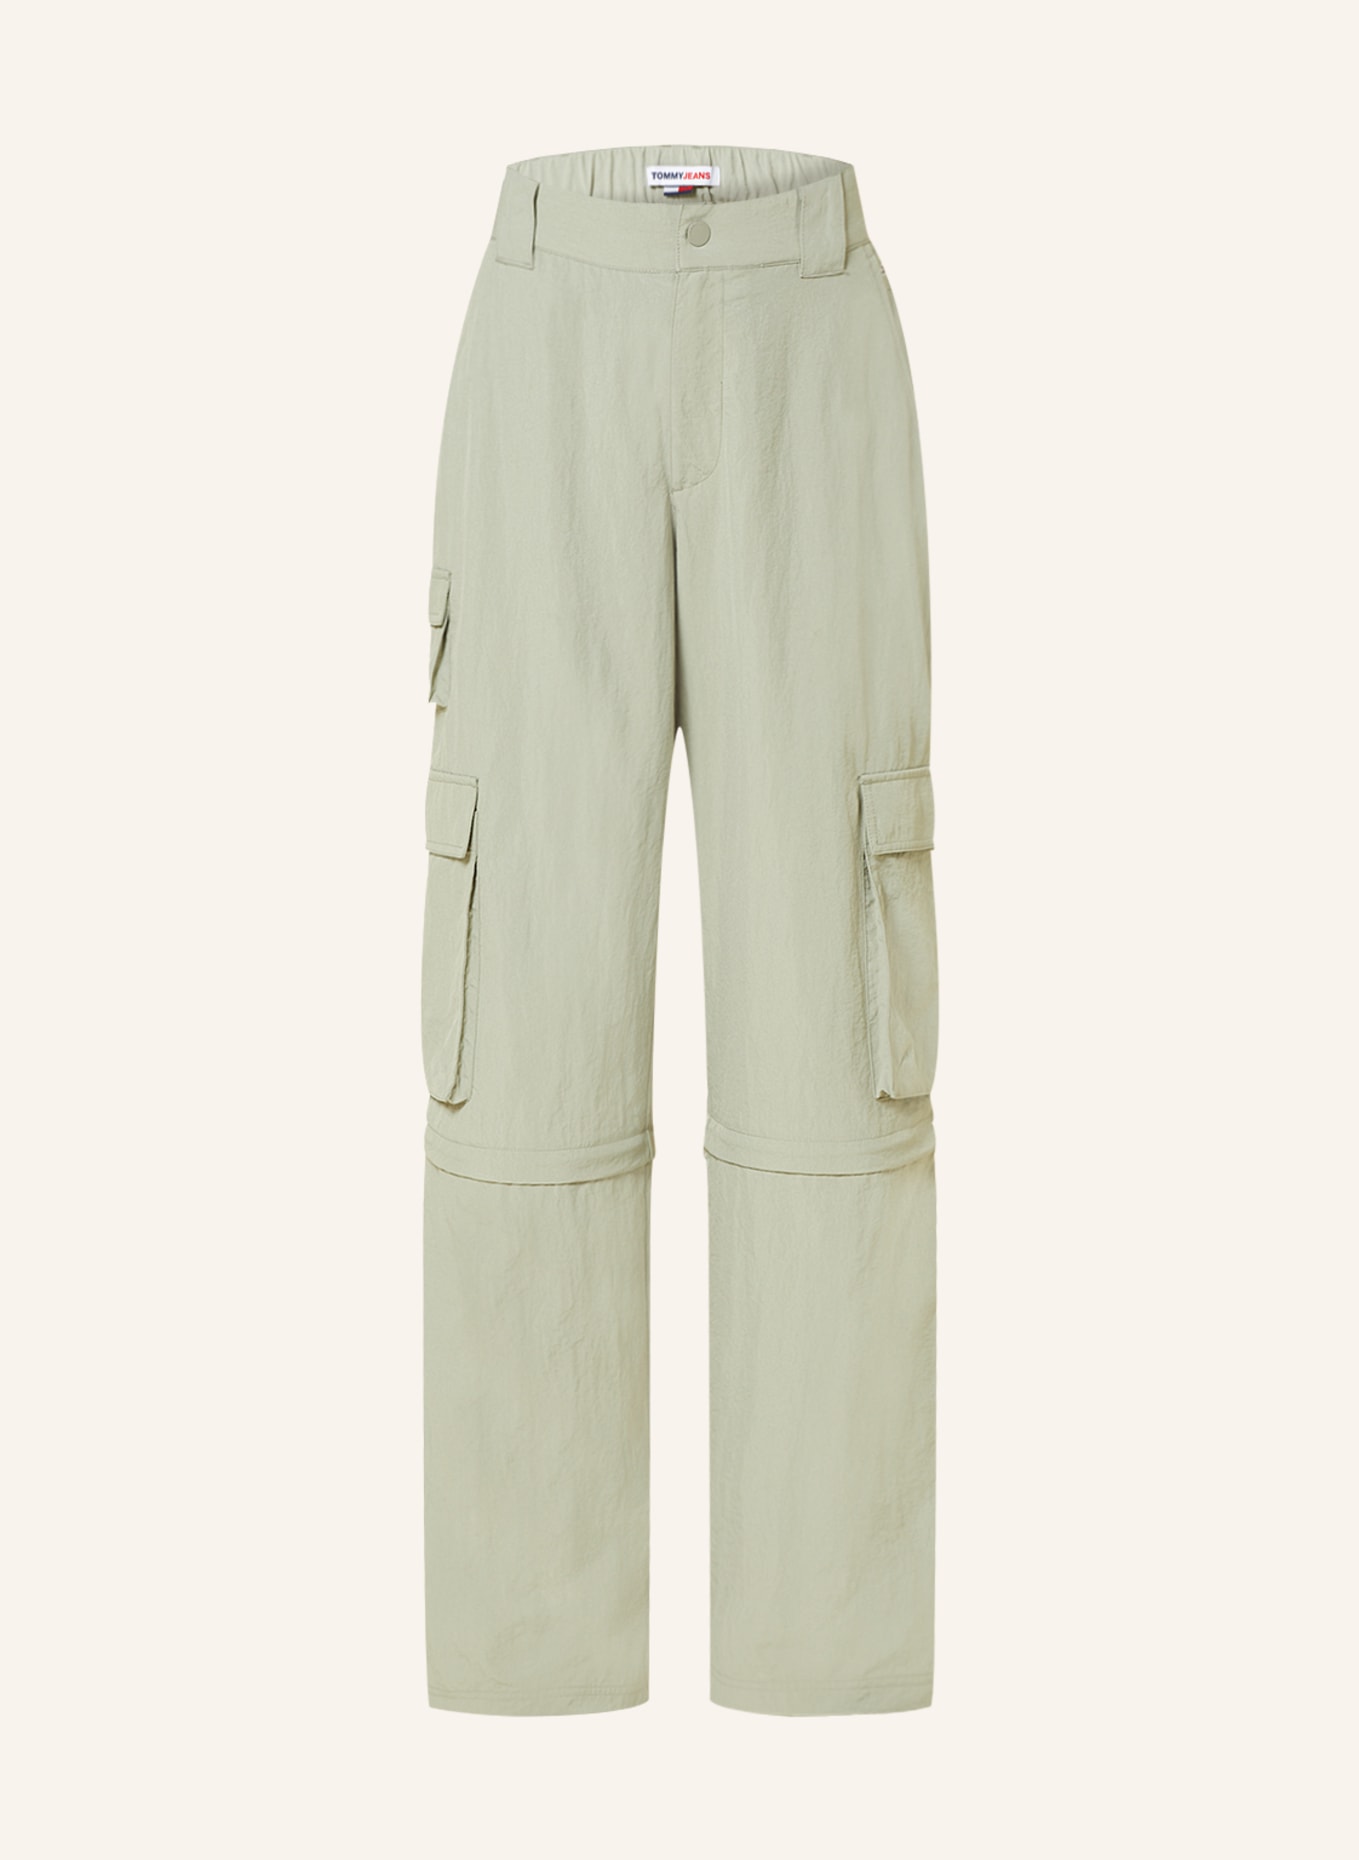 TOMMY JEANS Cargohose CLAIRE, Farbe: OLIV (Bild 1)